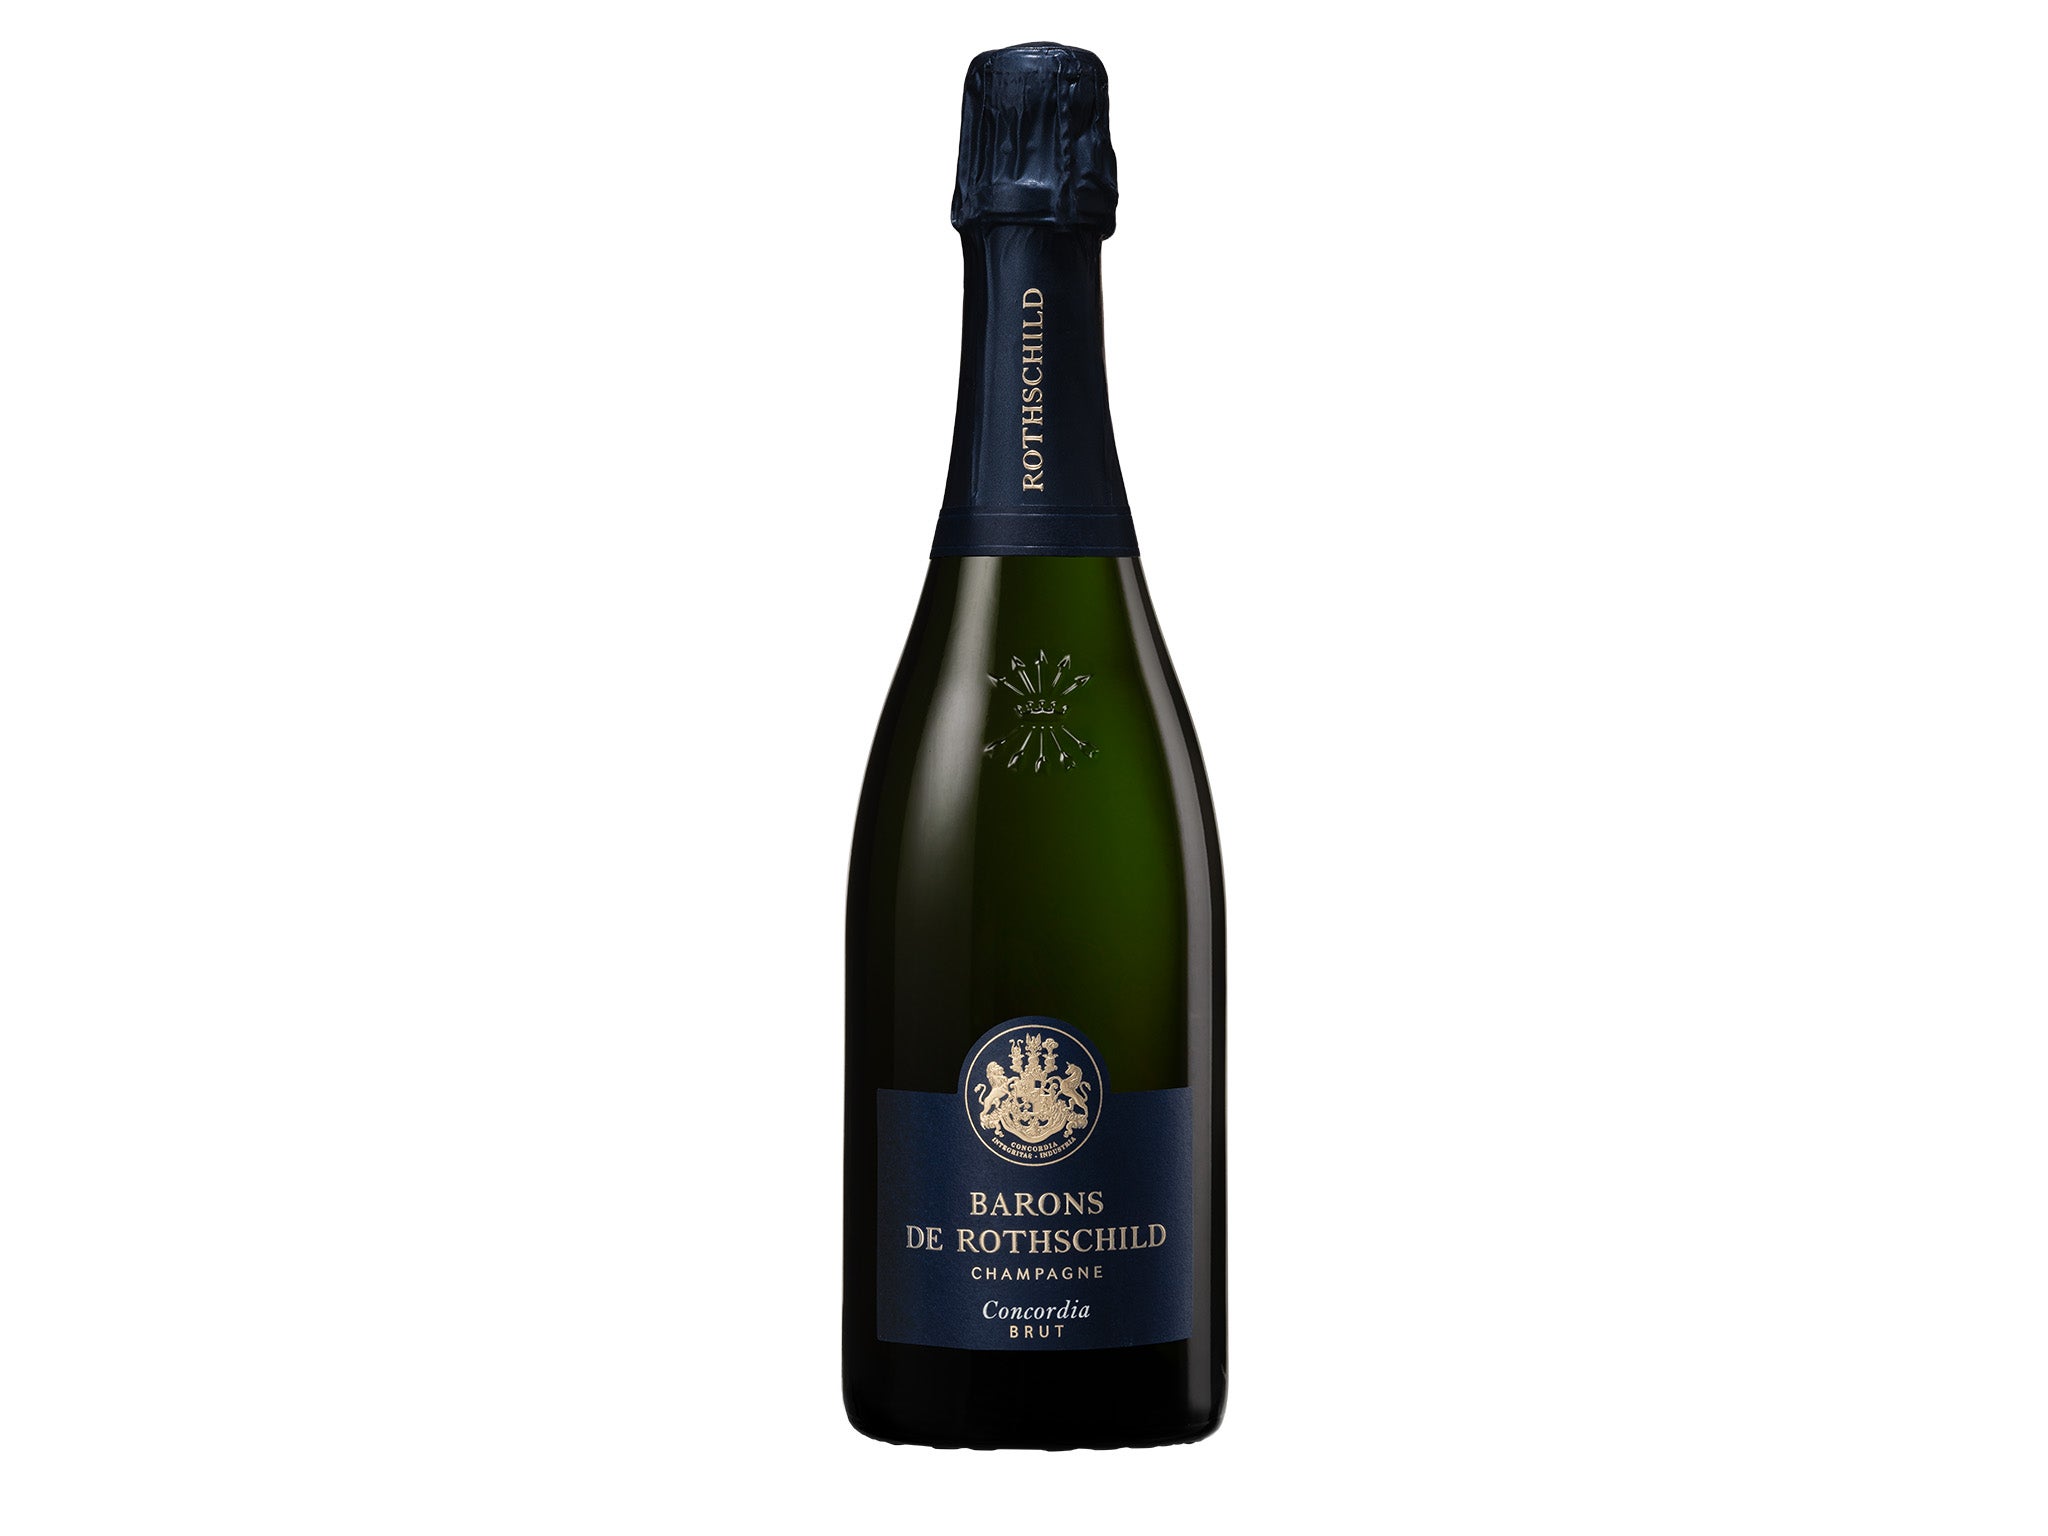 Barons de Rothschild champagne review